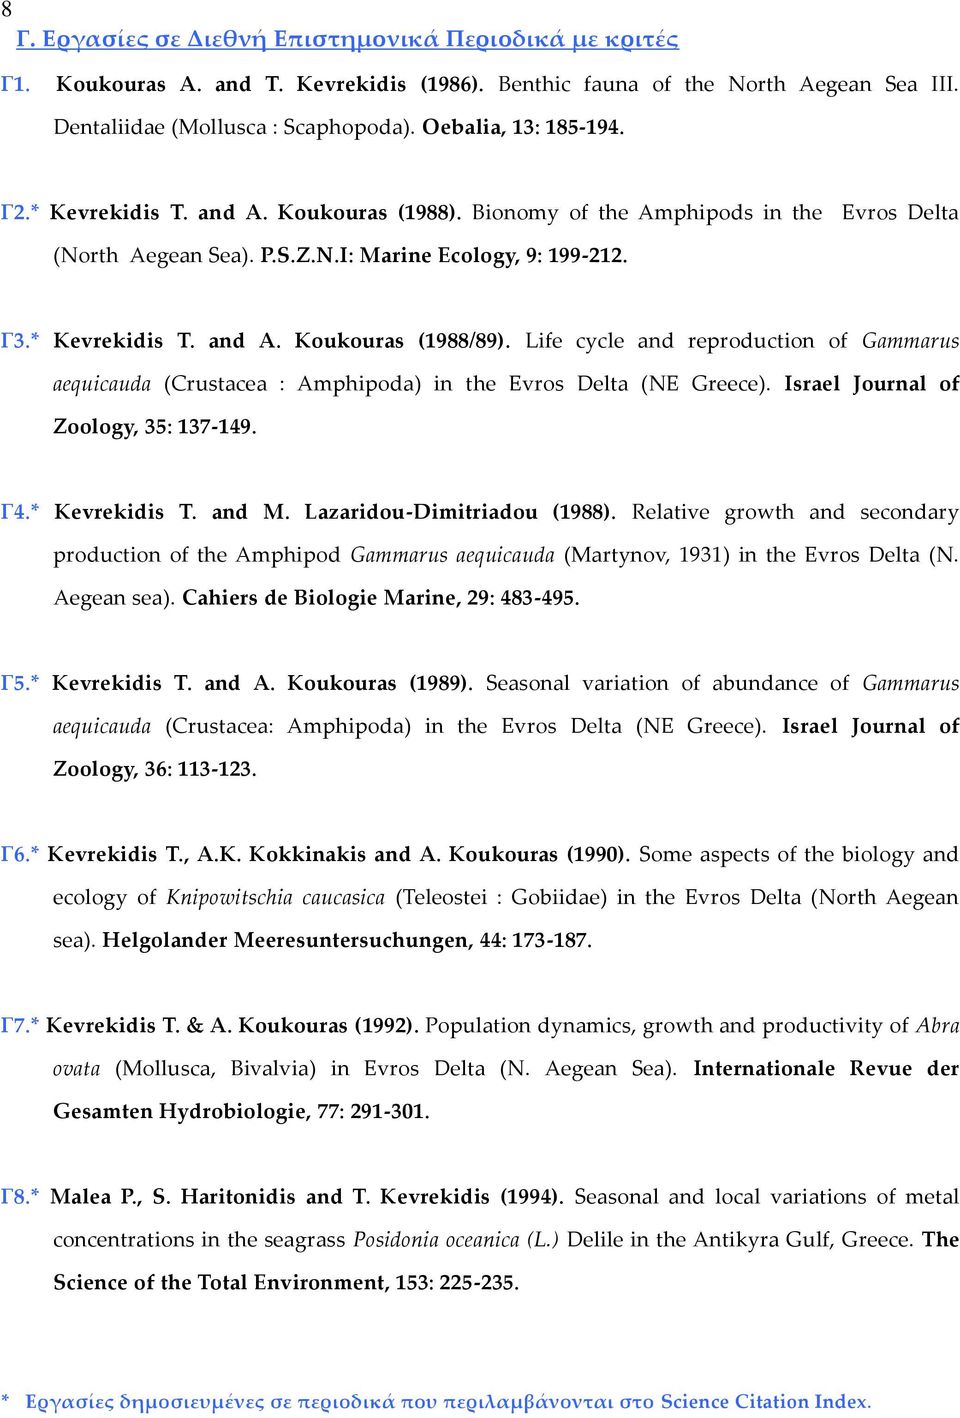 Life cycle and reproduction of Gammarus aequicauda (Crustacea : Amphipoda) in the Evros Delta (NE Greece). Israel Journal of Zoology, 35: 137-149. Γ4.* Kevrekidis T. and M.